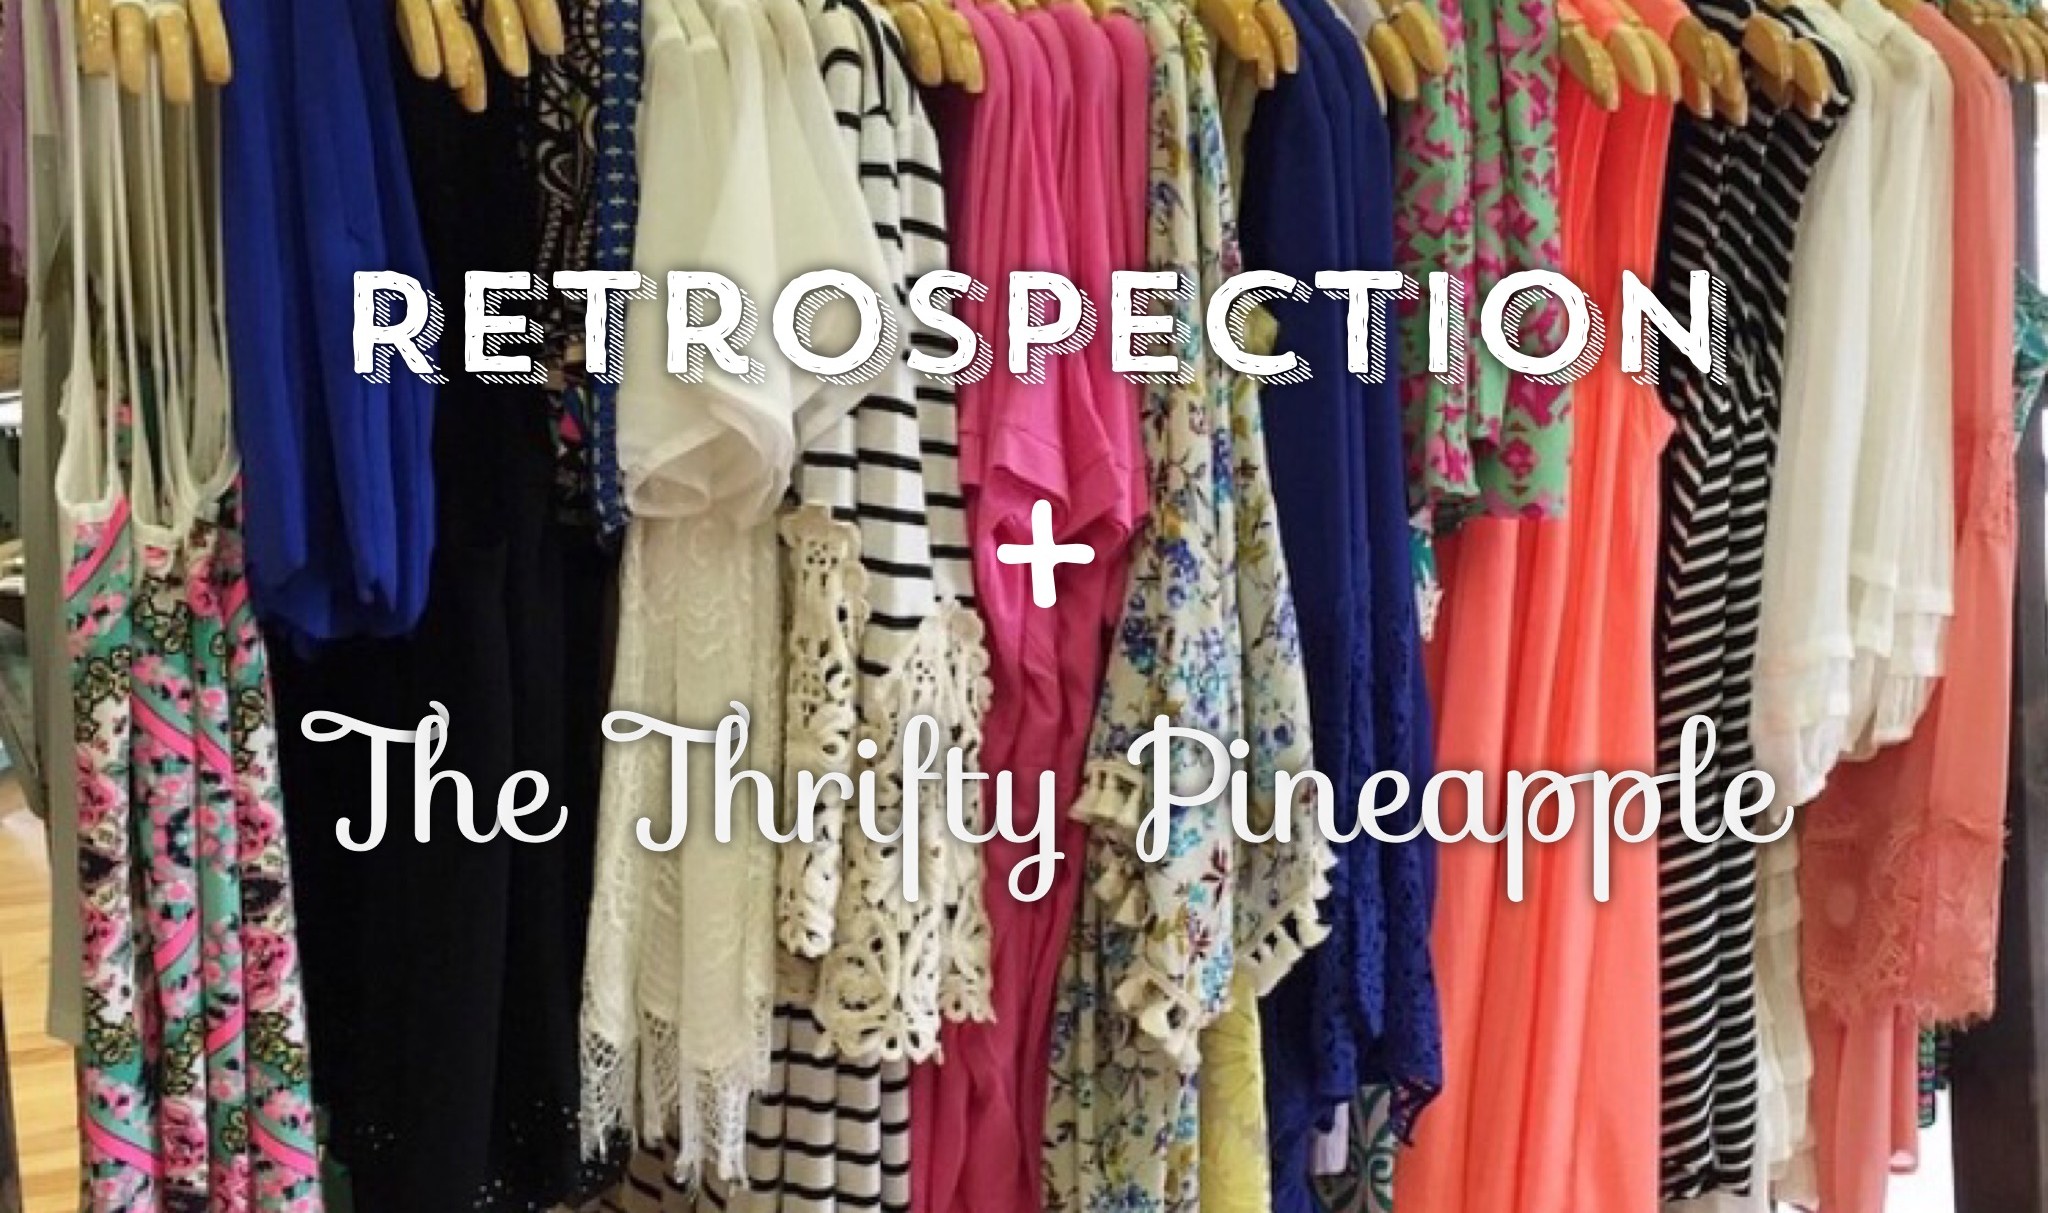 Retrospection + The Thrifty Pineapple